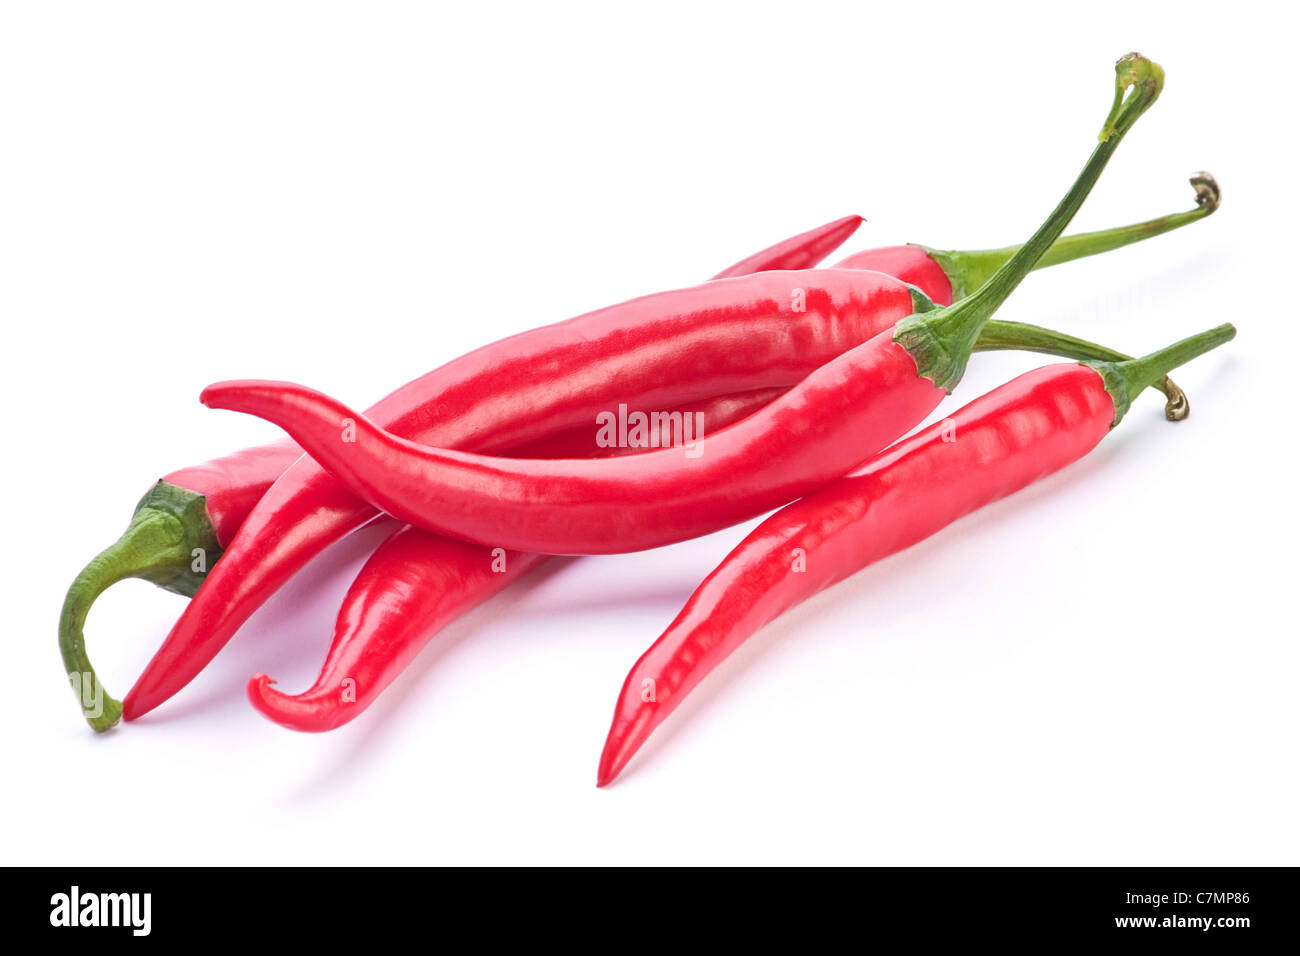 Red chili pepper vegetable on white background Stock Photo